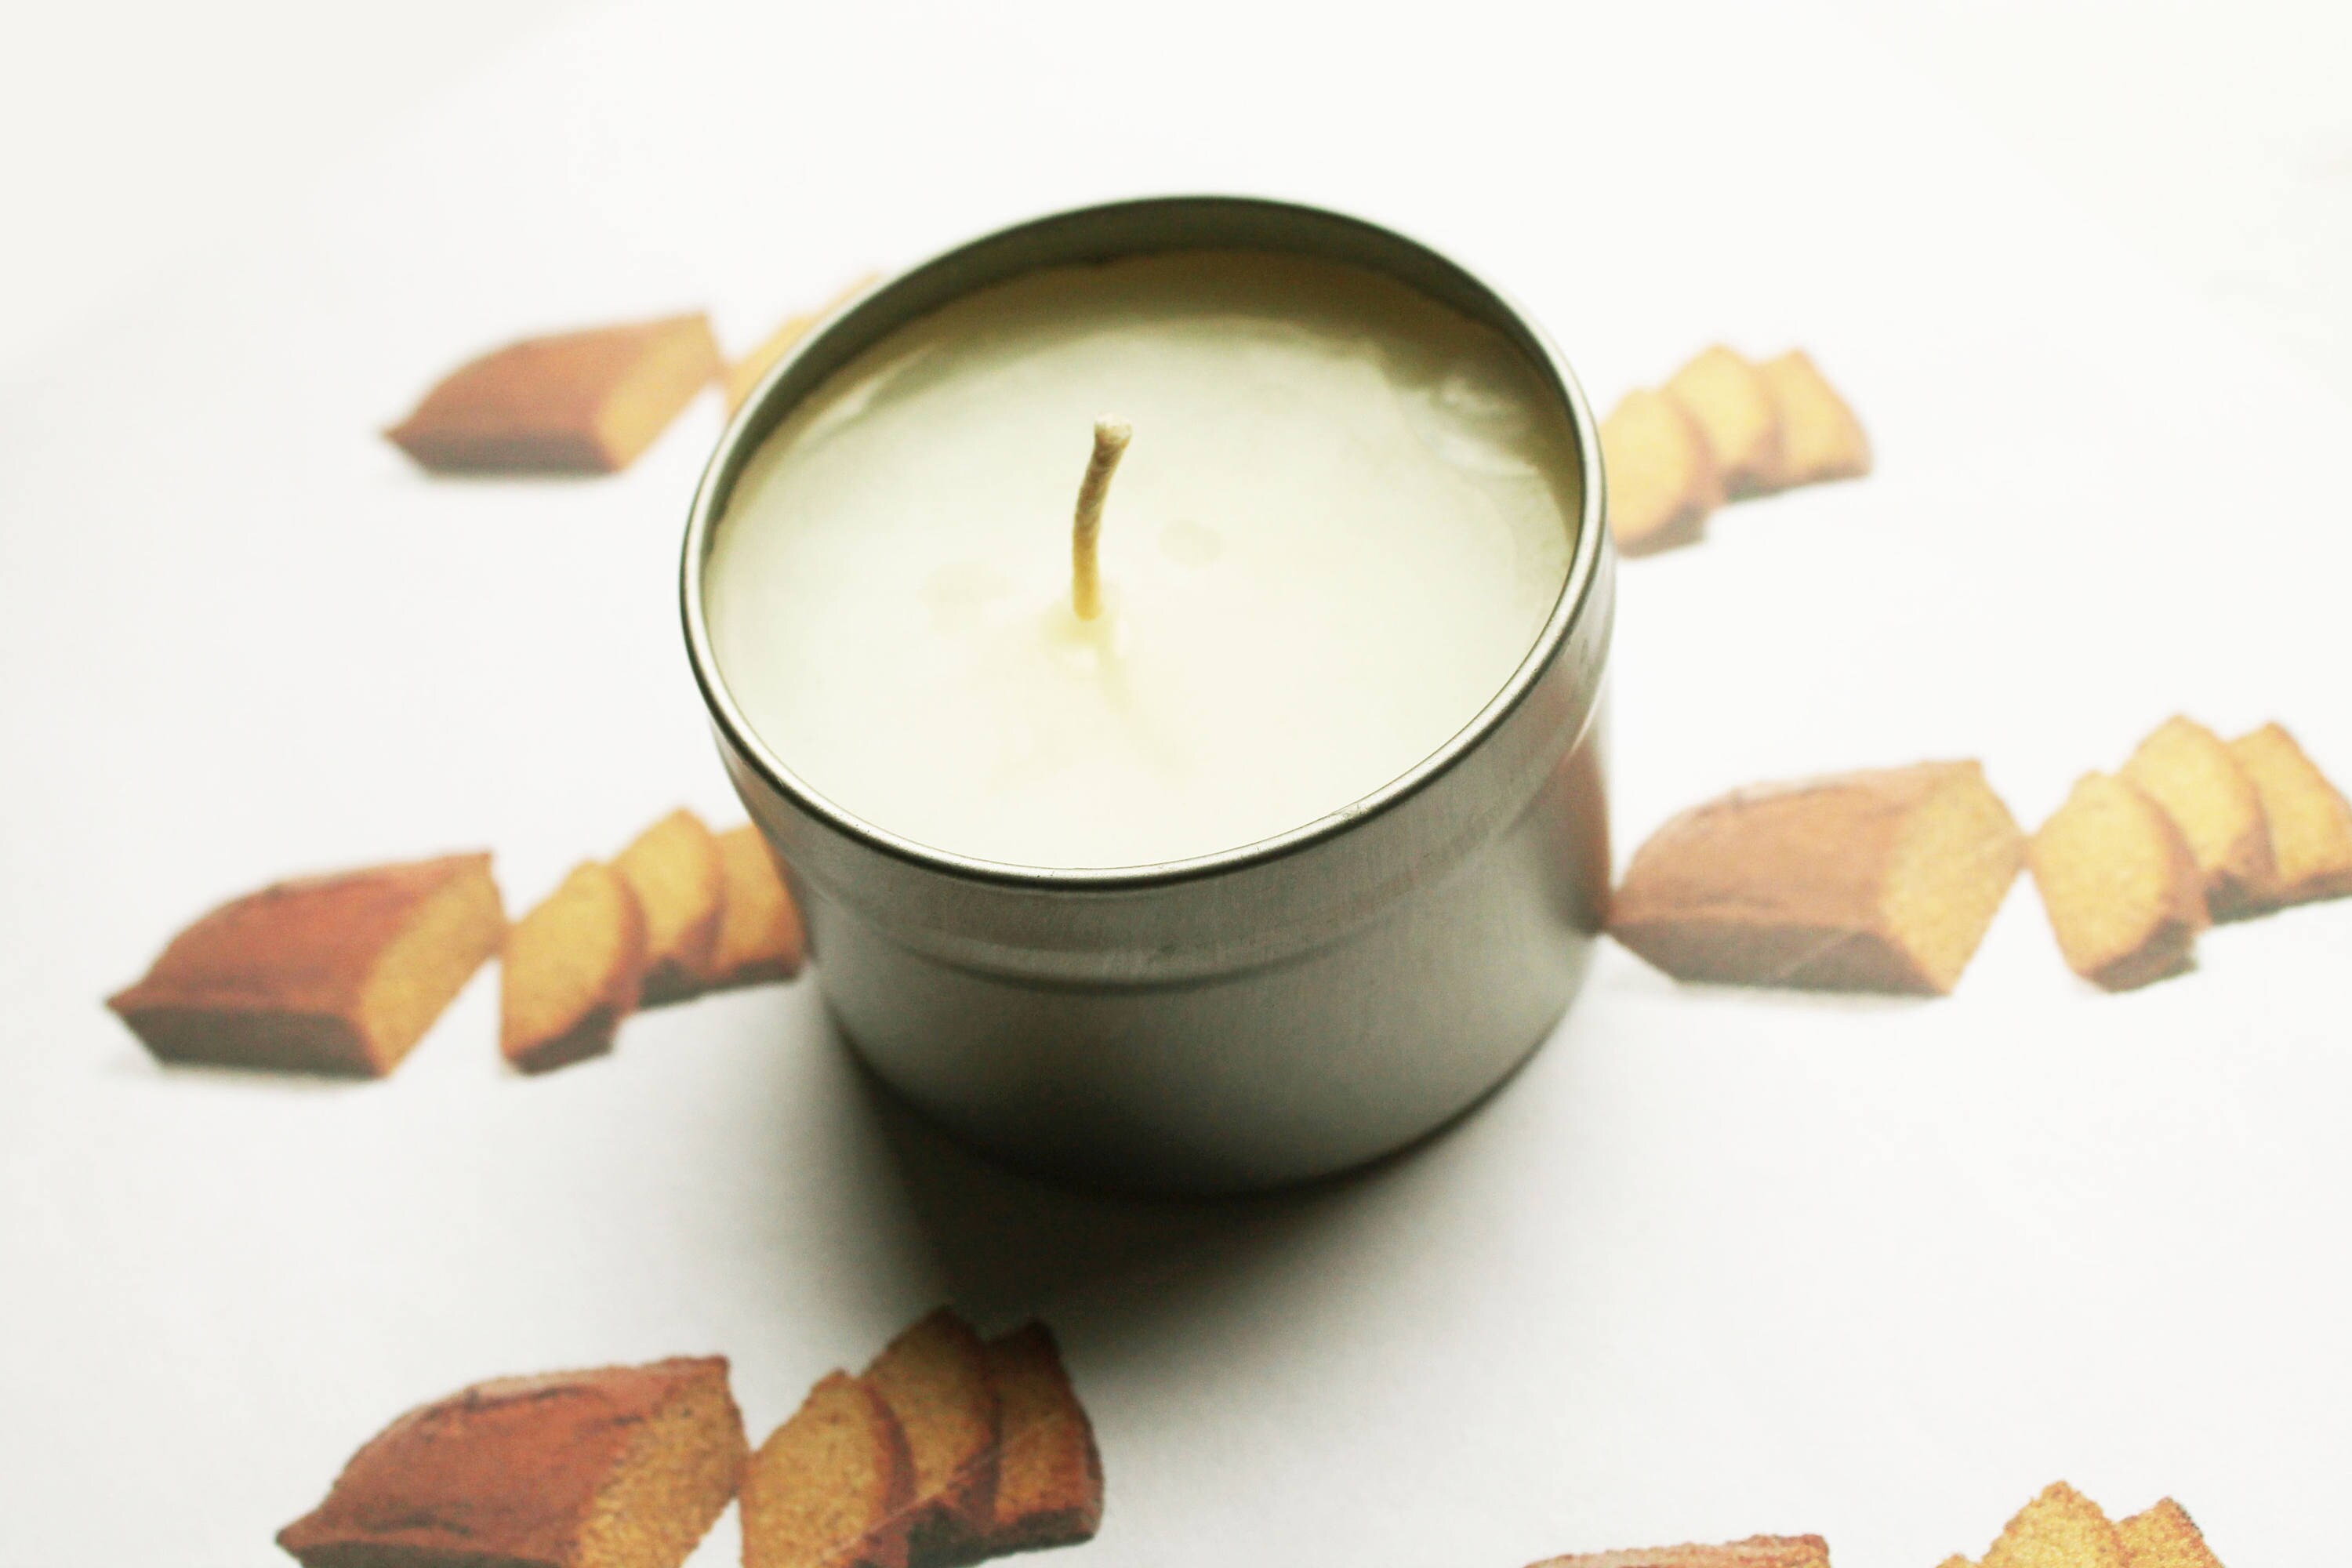 Garlic Scented Candle Vegan Soy Wax, Homemade Home Gift Candles, Tin  Container Candle 